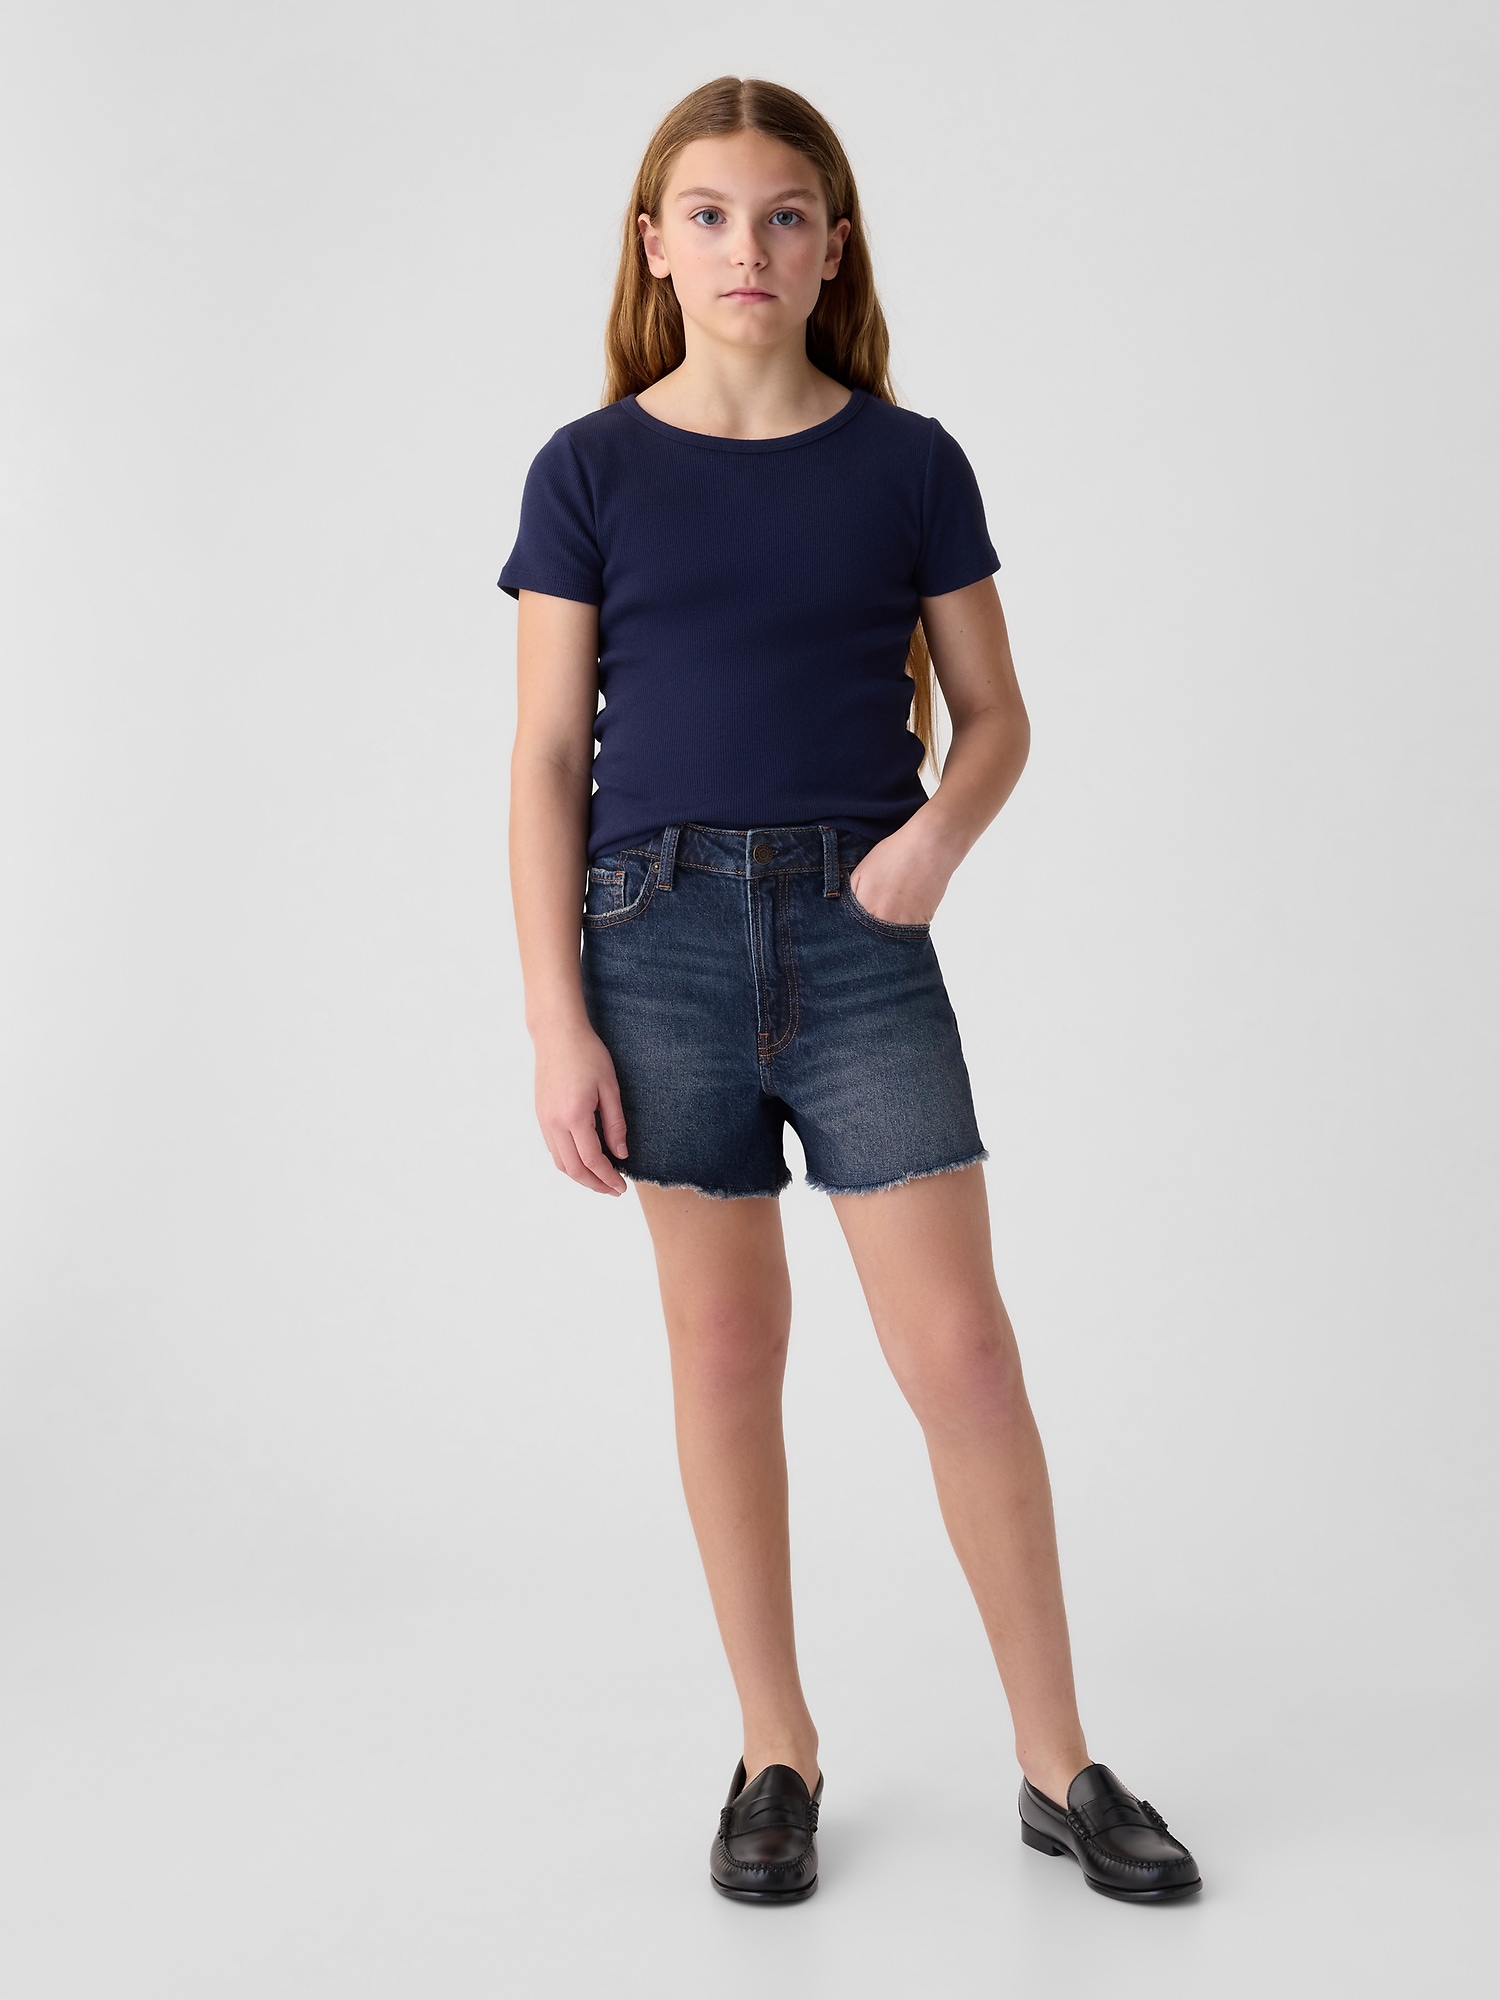 High Waisted Locomotive Jeans: Sexy Booty High Waisted Denim Shorts For  Womens Dancing And Beauty Needs L230619 From Liancheng01, $9.41